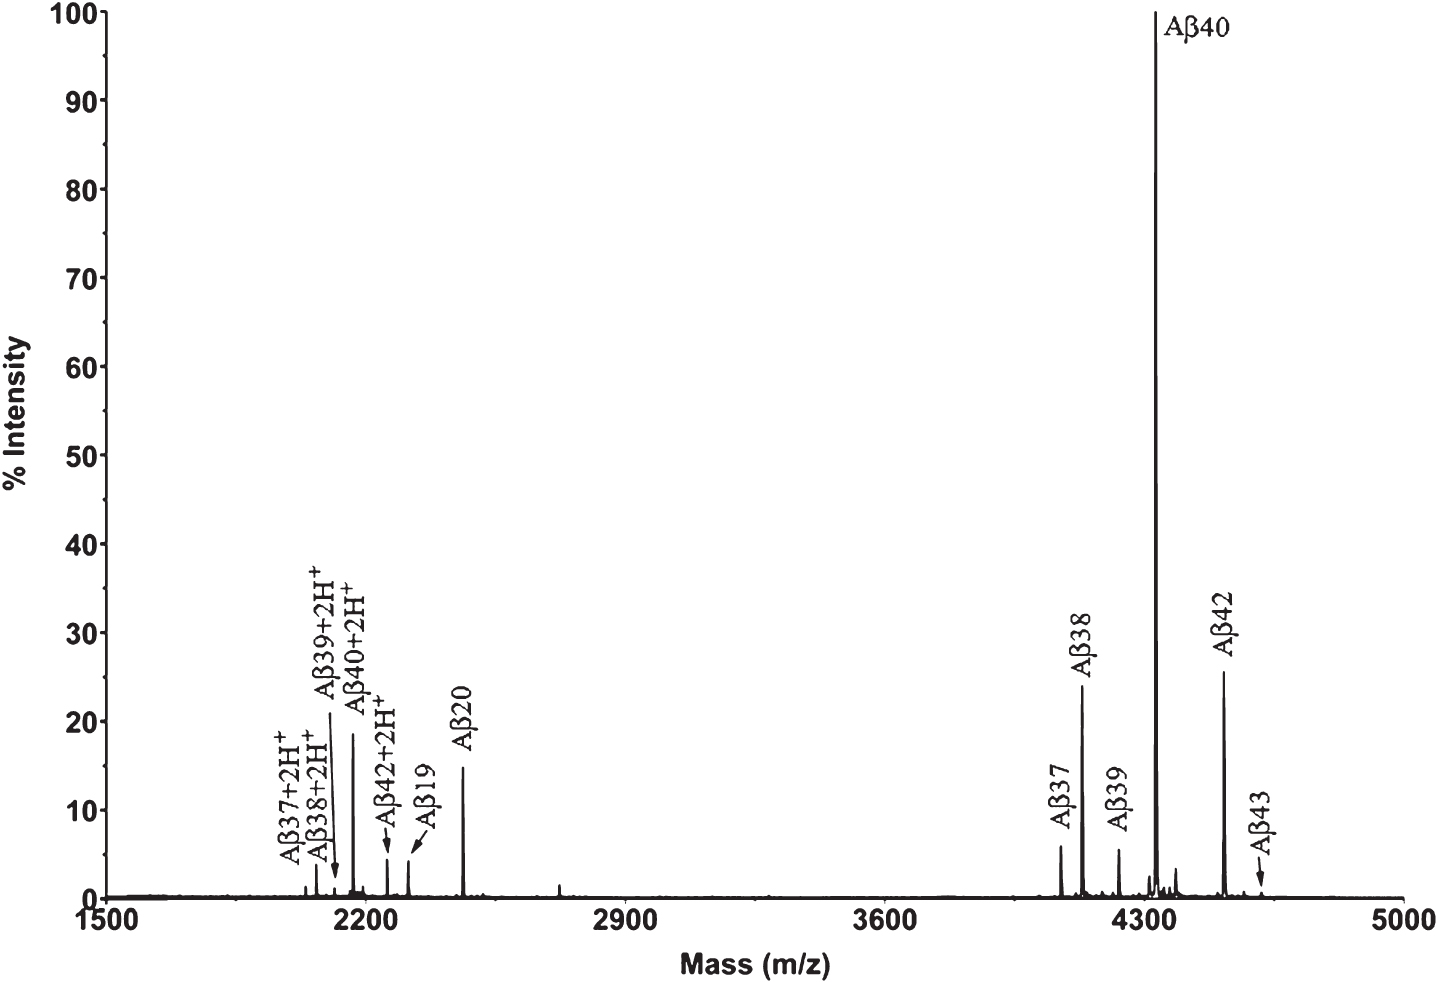 Mass spectrum of a brain extract from Tg2576 mice (aged 18 months) after immunoprecipitation with 1F3.